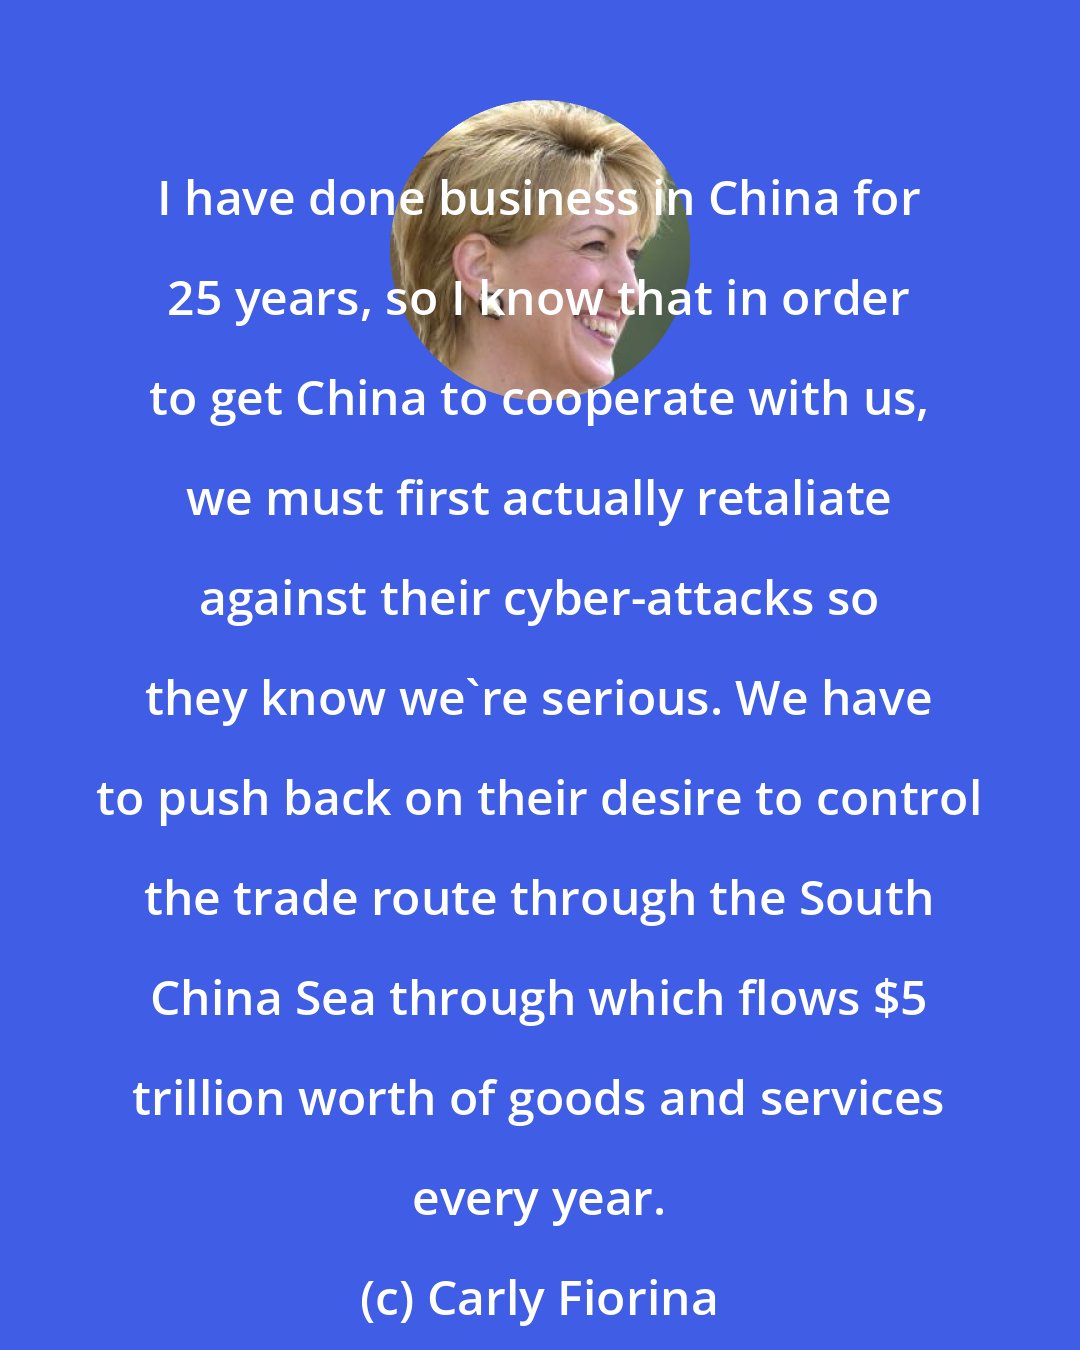 Carly Fiorina: I have done business in China for 25 years, so I know that in order to get China to cooperate with us, we must first actually retaliate against their cyber-attacks so they know we're serious. We have to push back on their desire to control the trade route through the South China Sea through which flows $5 trillion worth of goods and services every year.